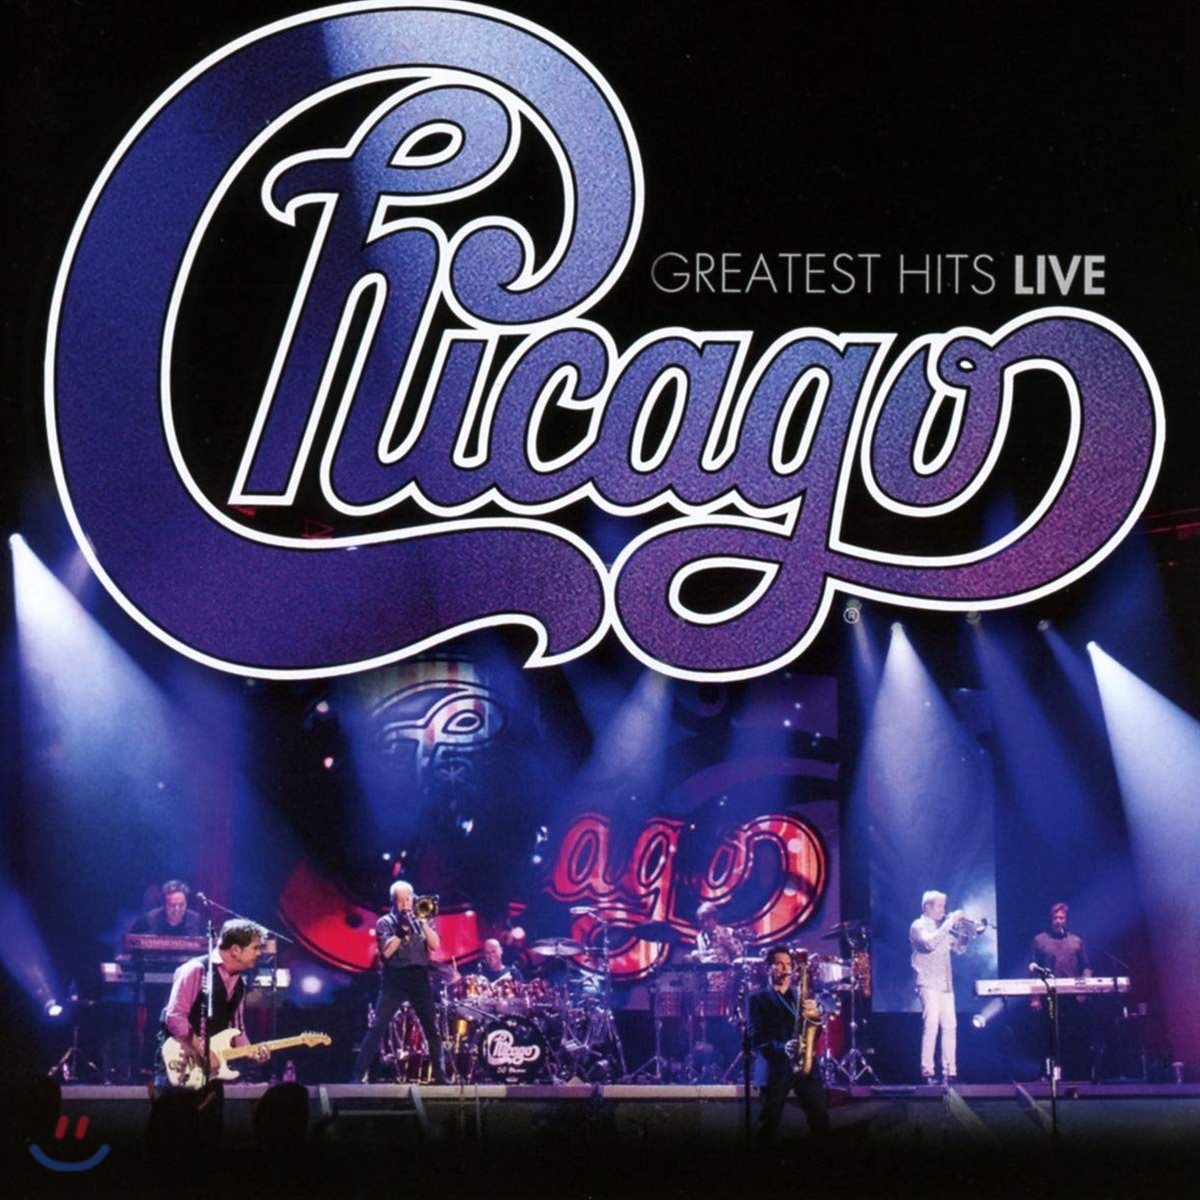 Chicago (시카고) - Greatest Hits Live